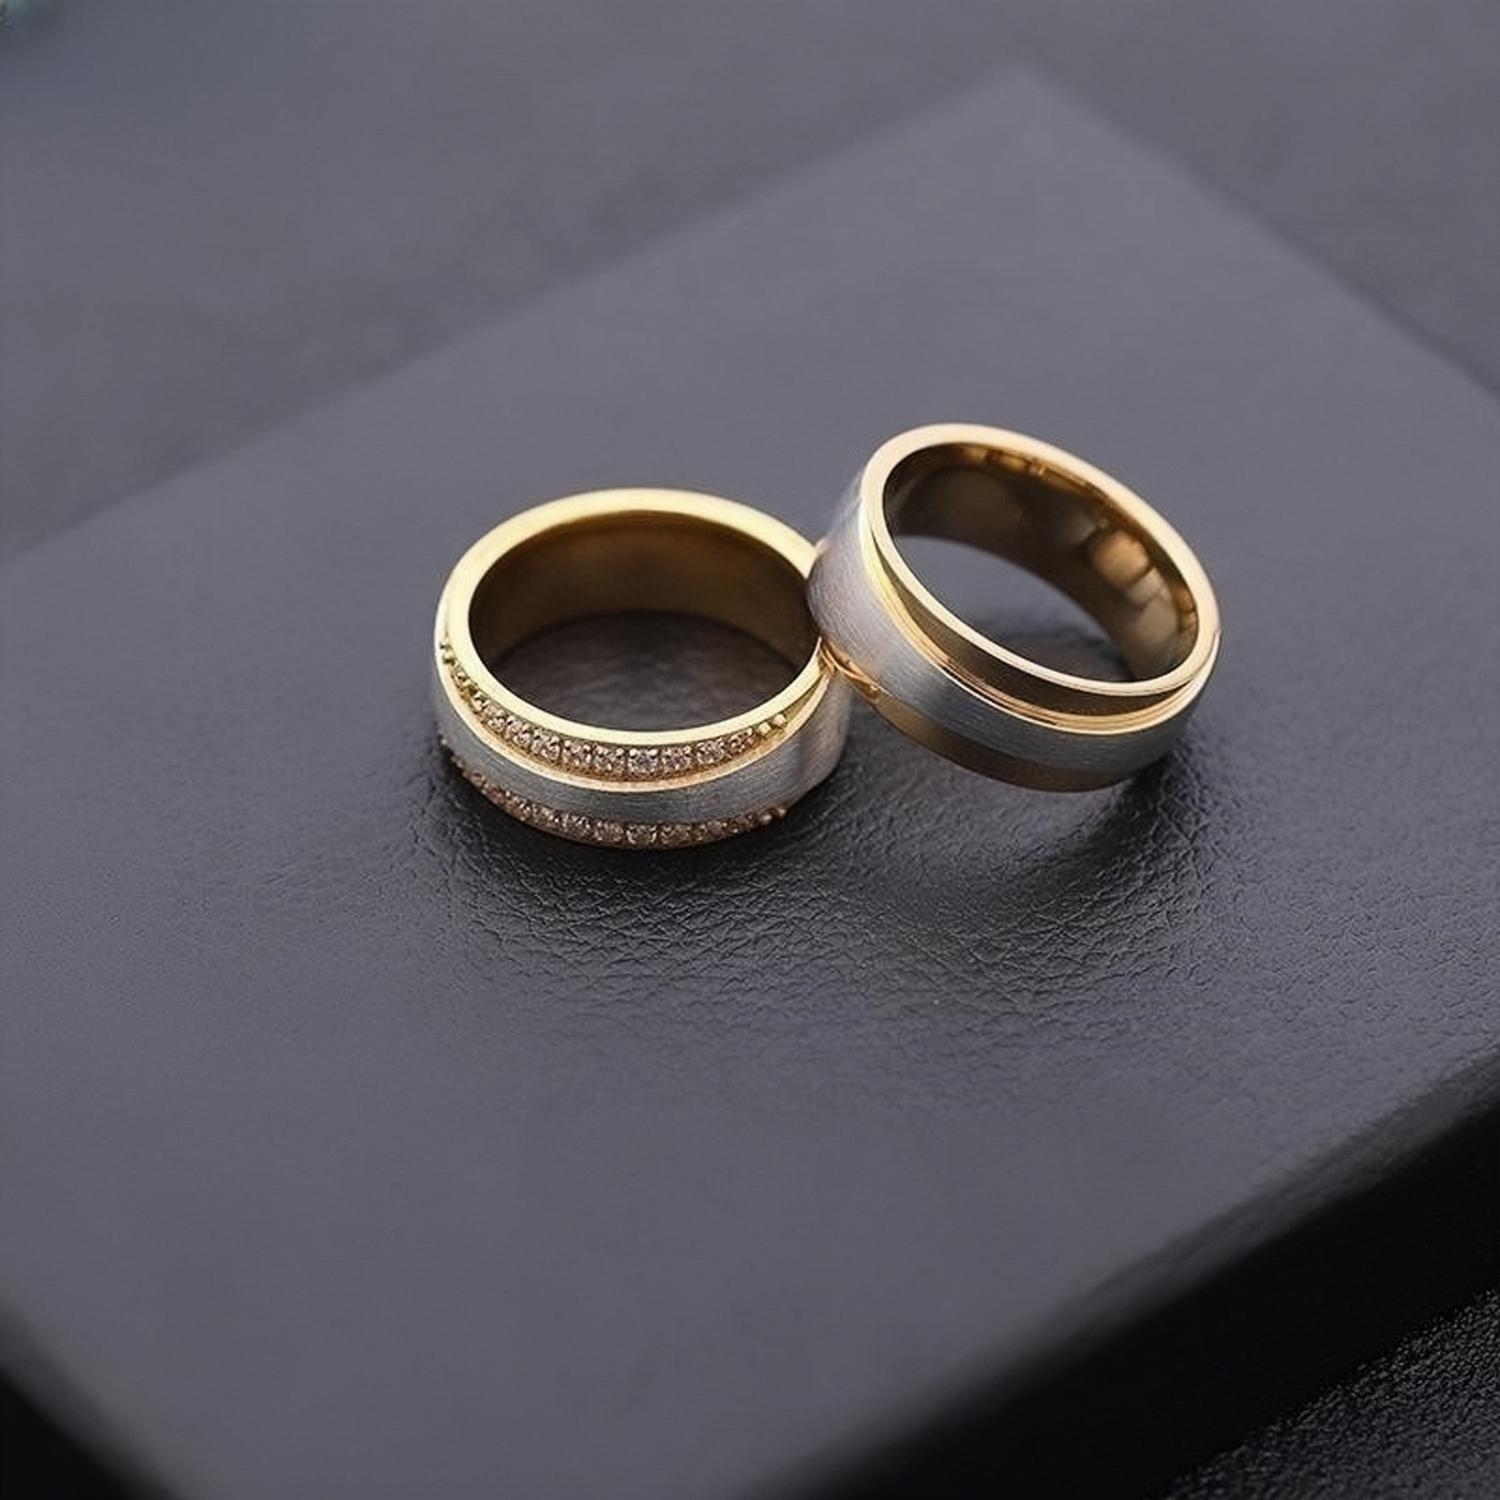 Engravable Matching Promise Rings For BF And GF In Titanium - CoupleSets